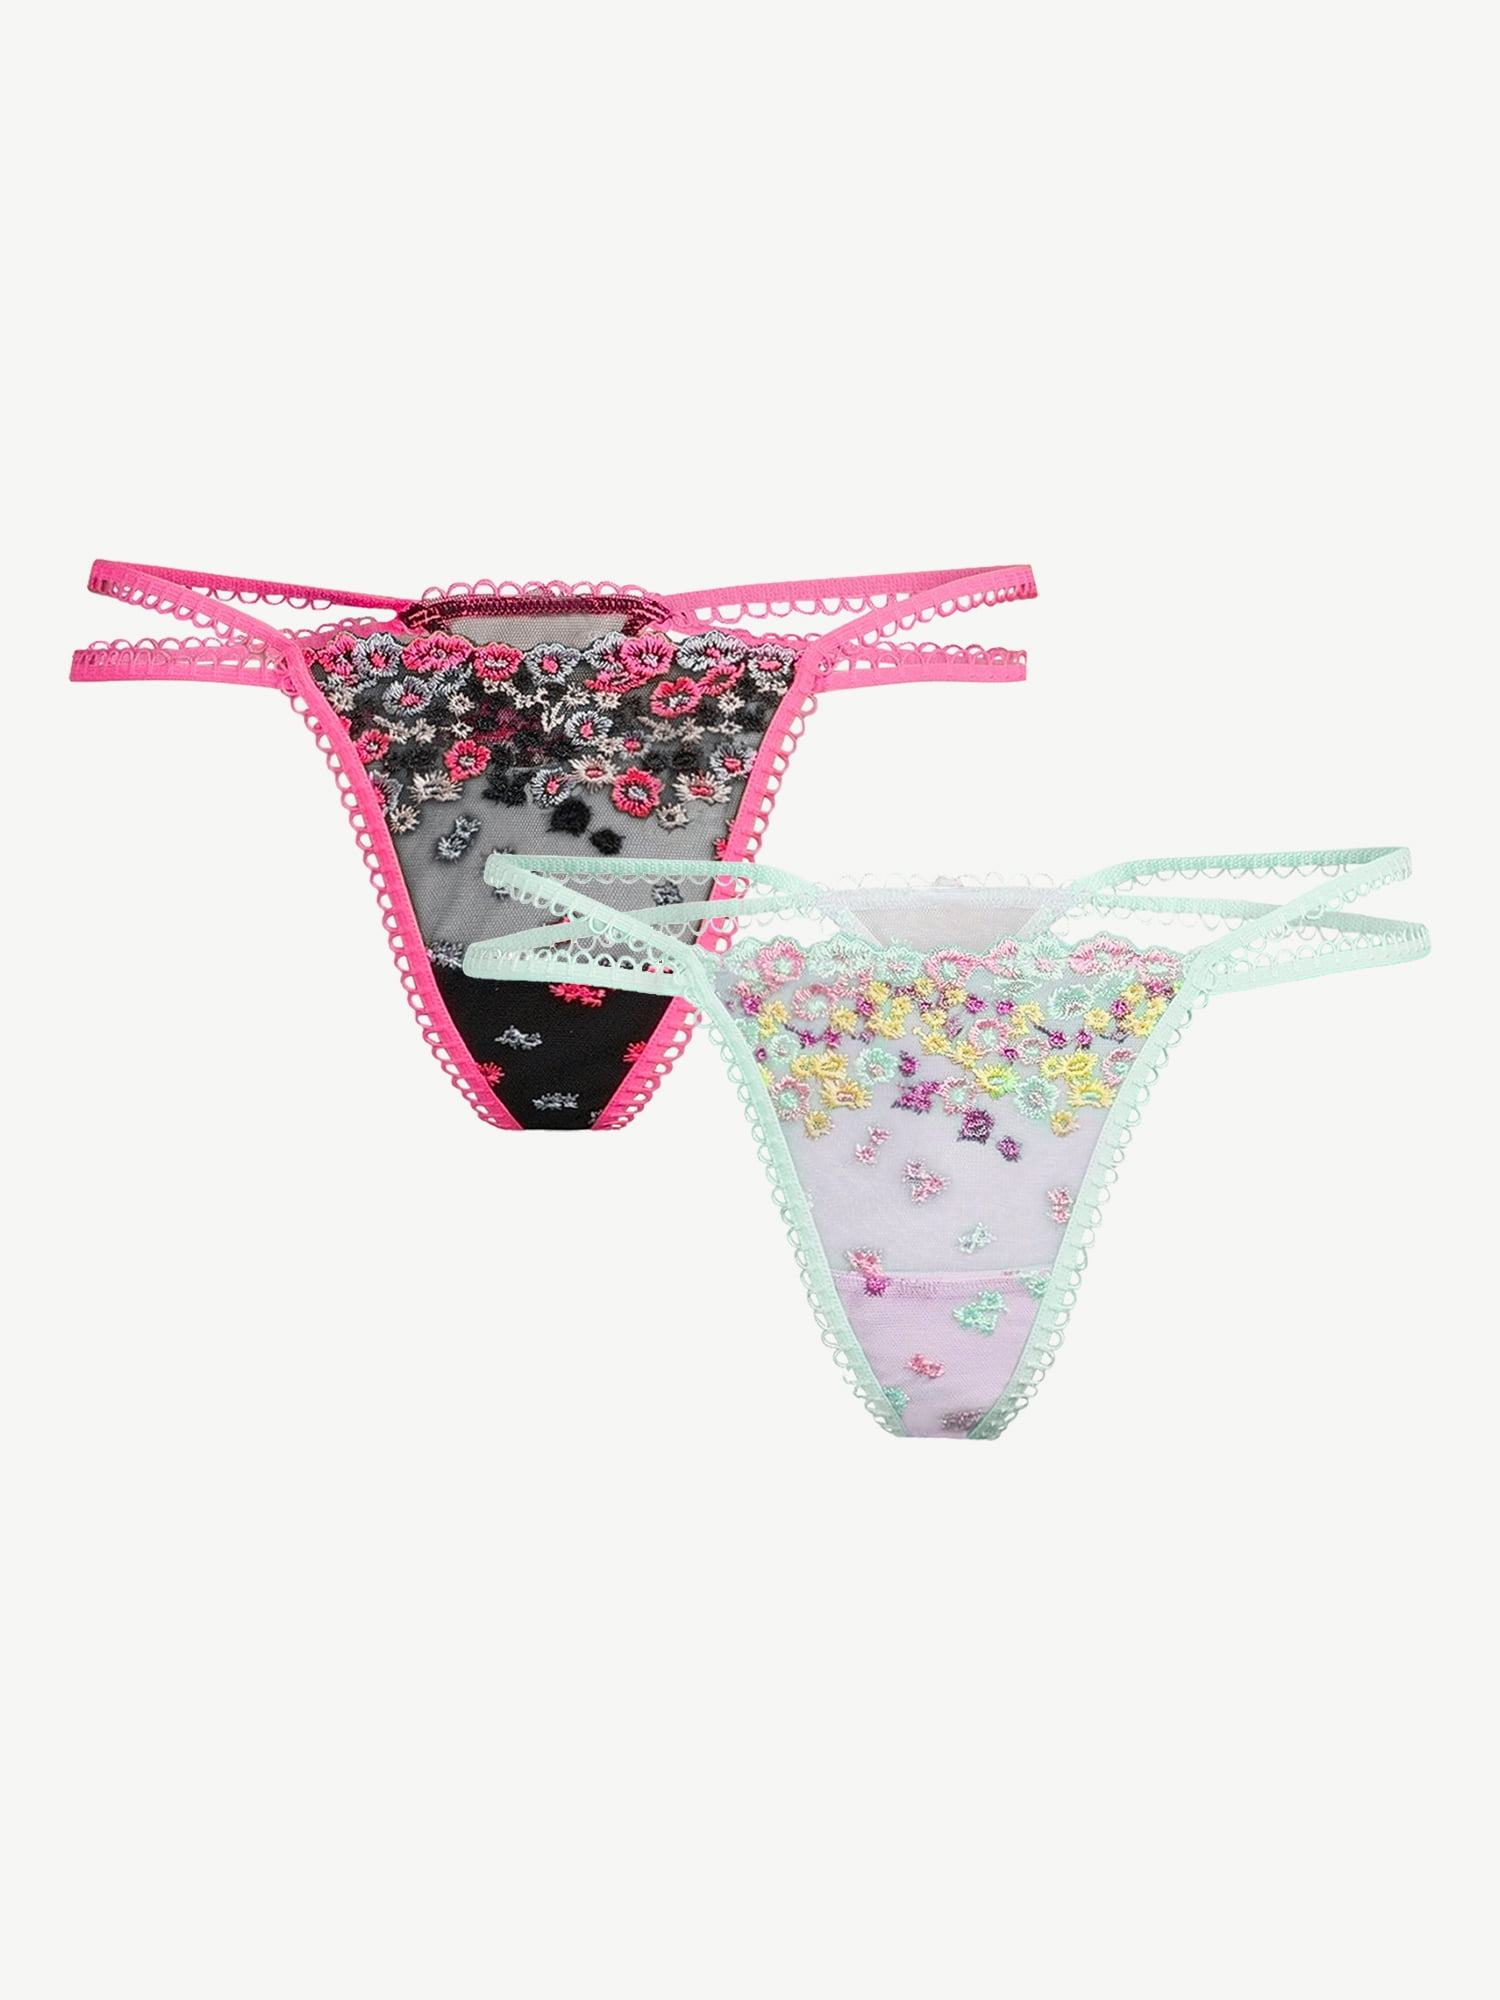 Sofia Intimates by Sofia Vergara Women's Strappy Embroidered Thong